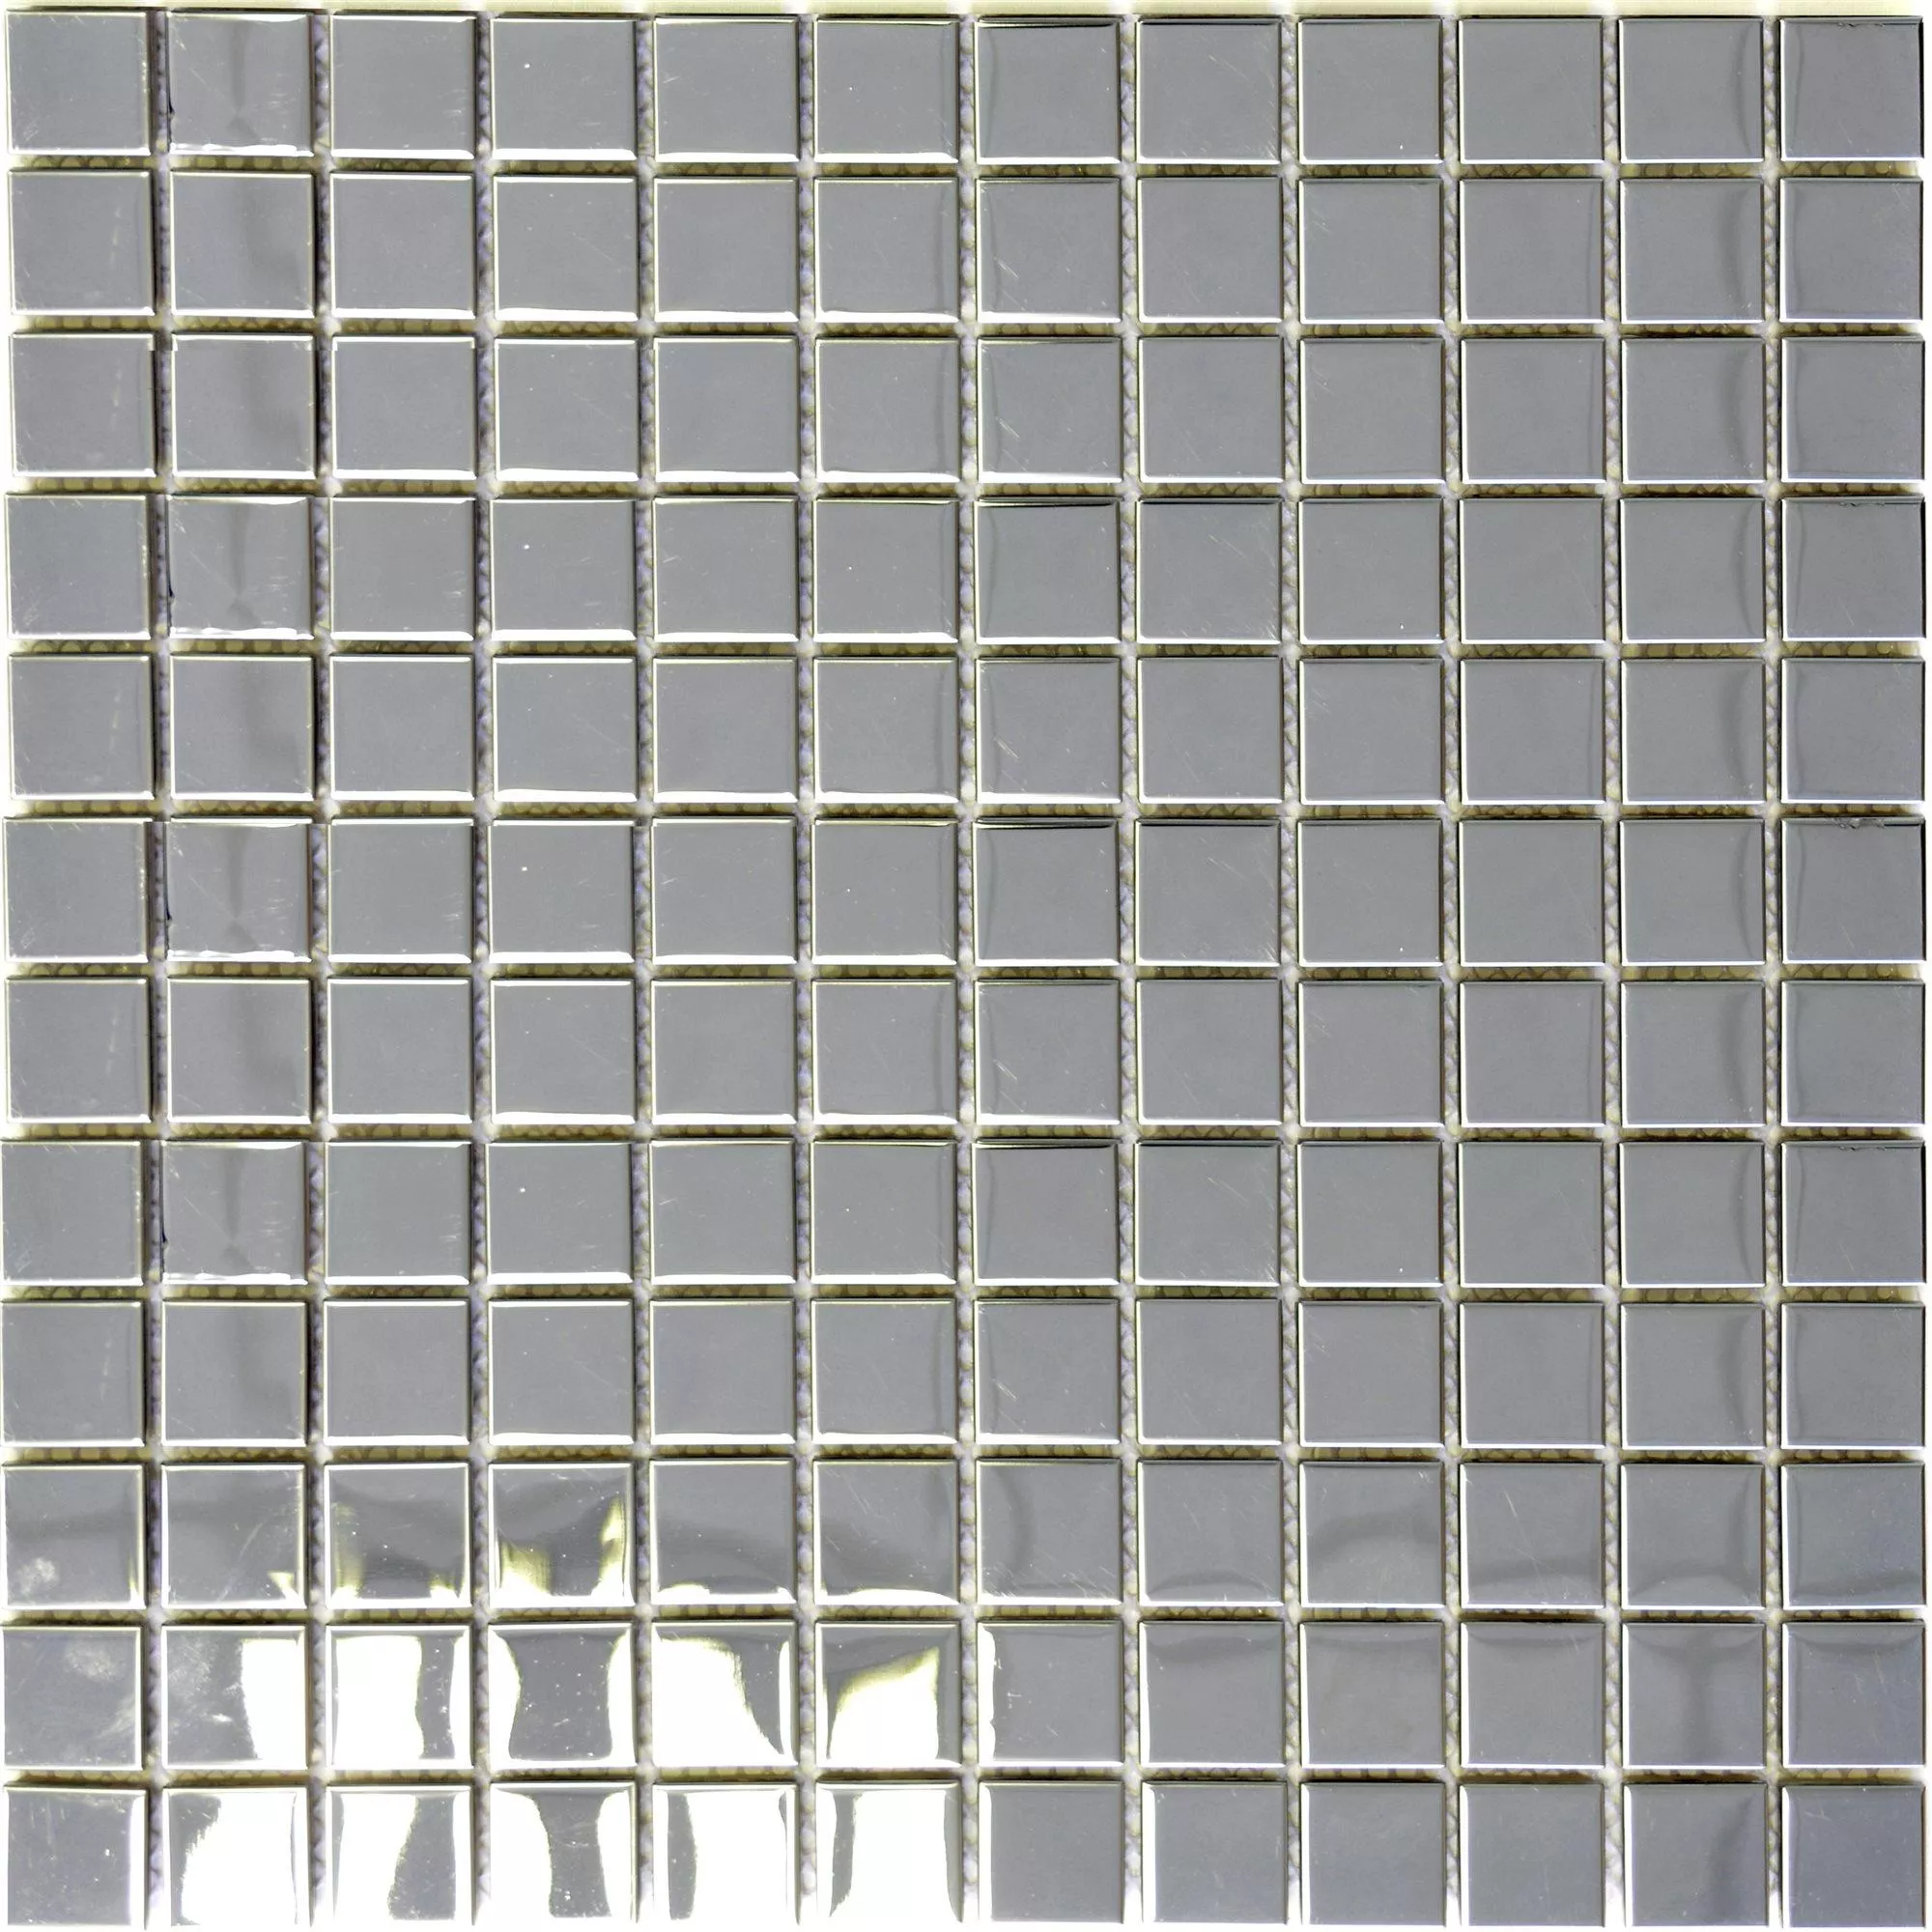 Sample Stainless Steel Mosaic Tiles Magnet Glossy Square 23